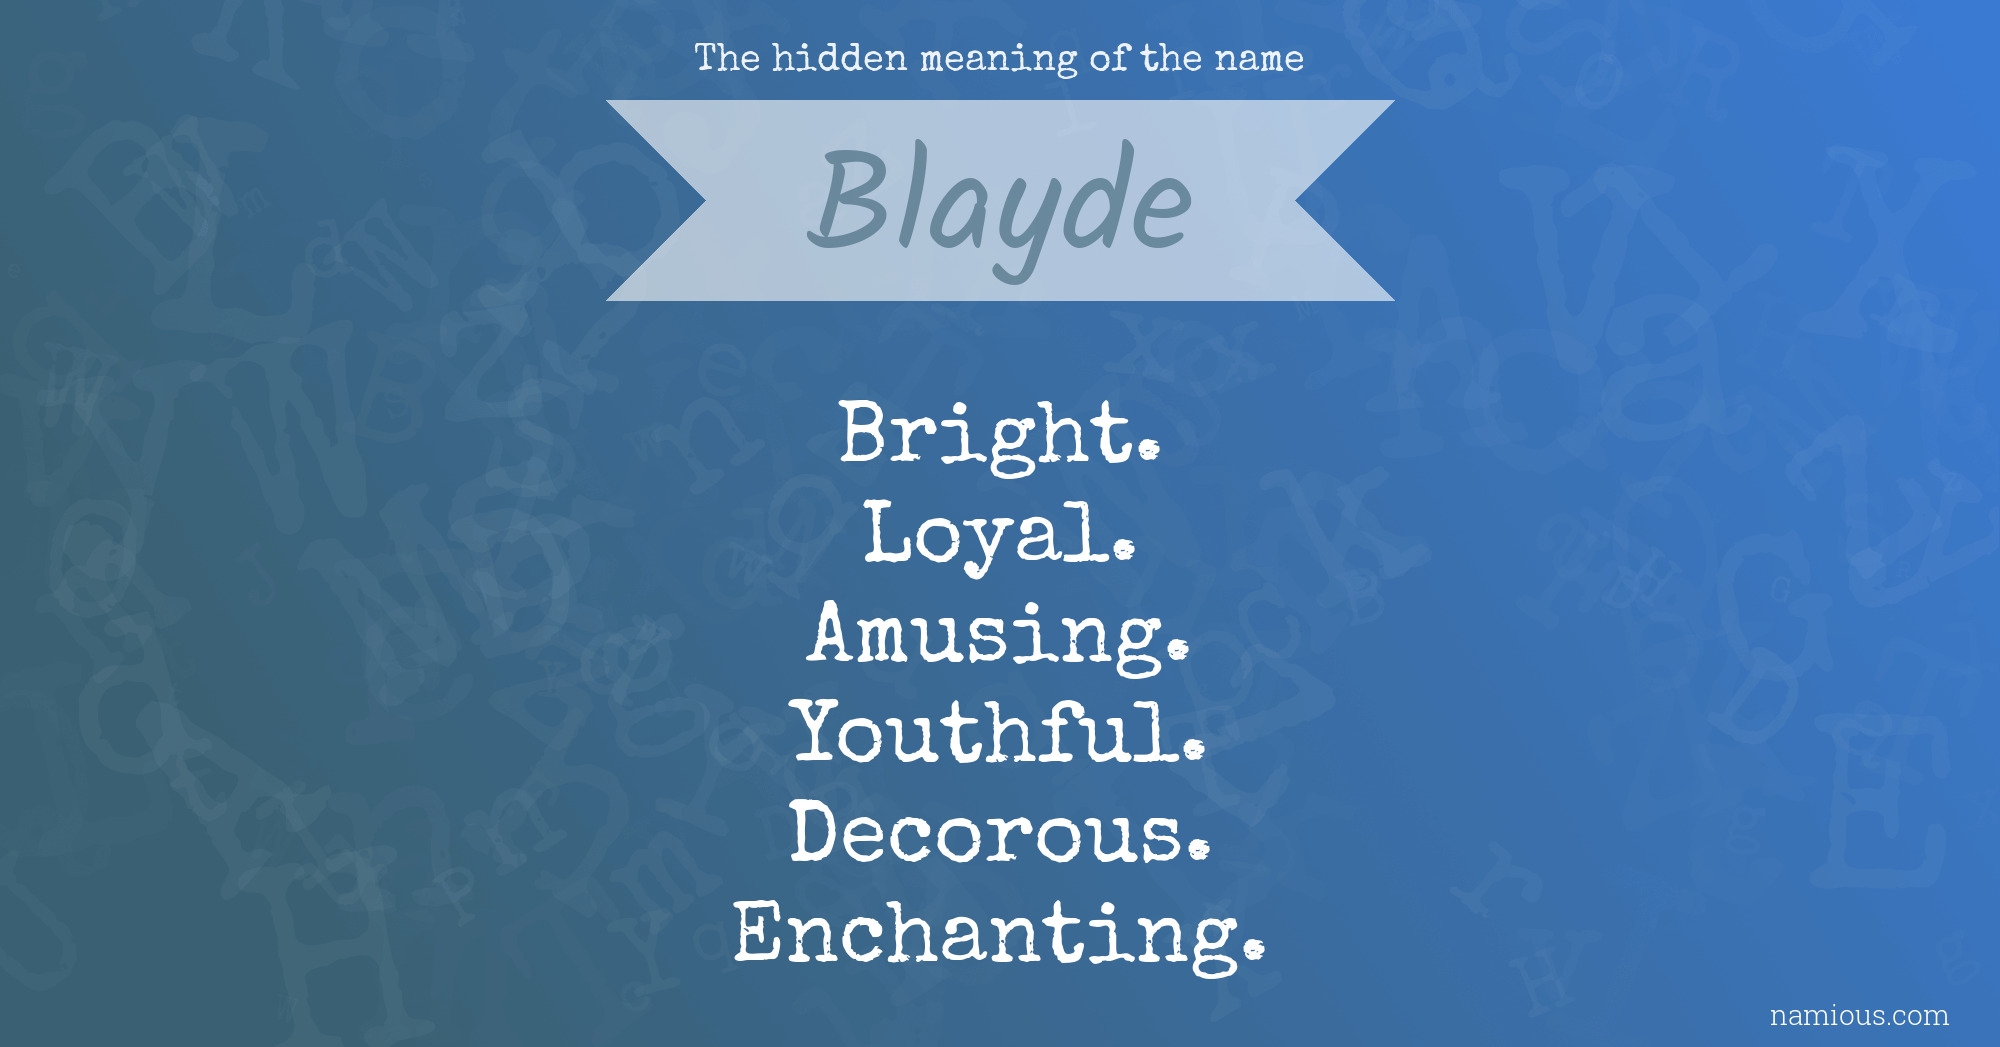 The hidden meaning of the name Blayde